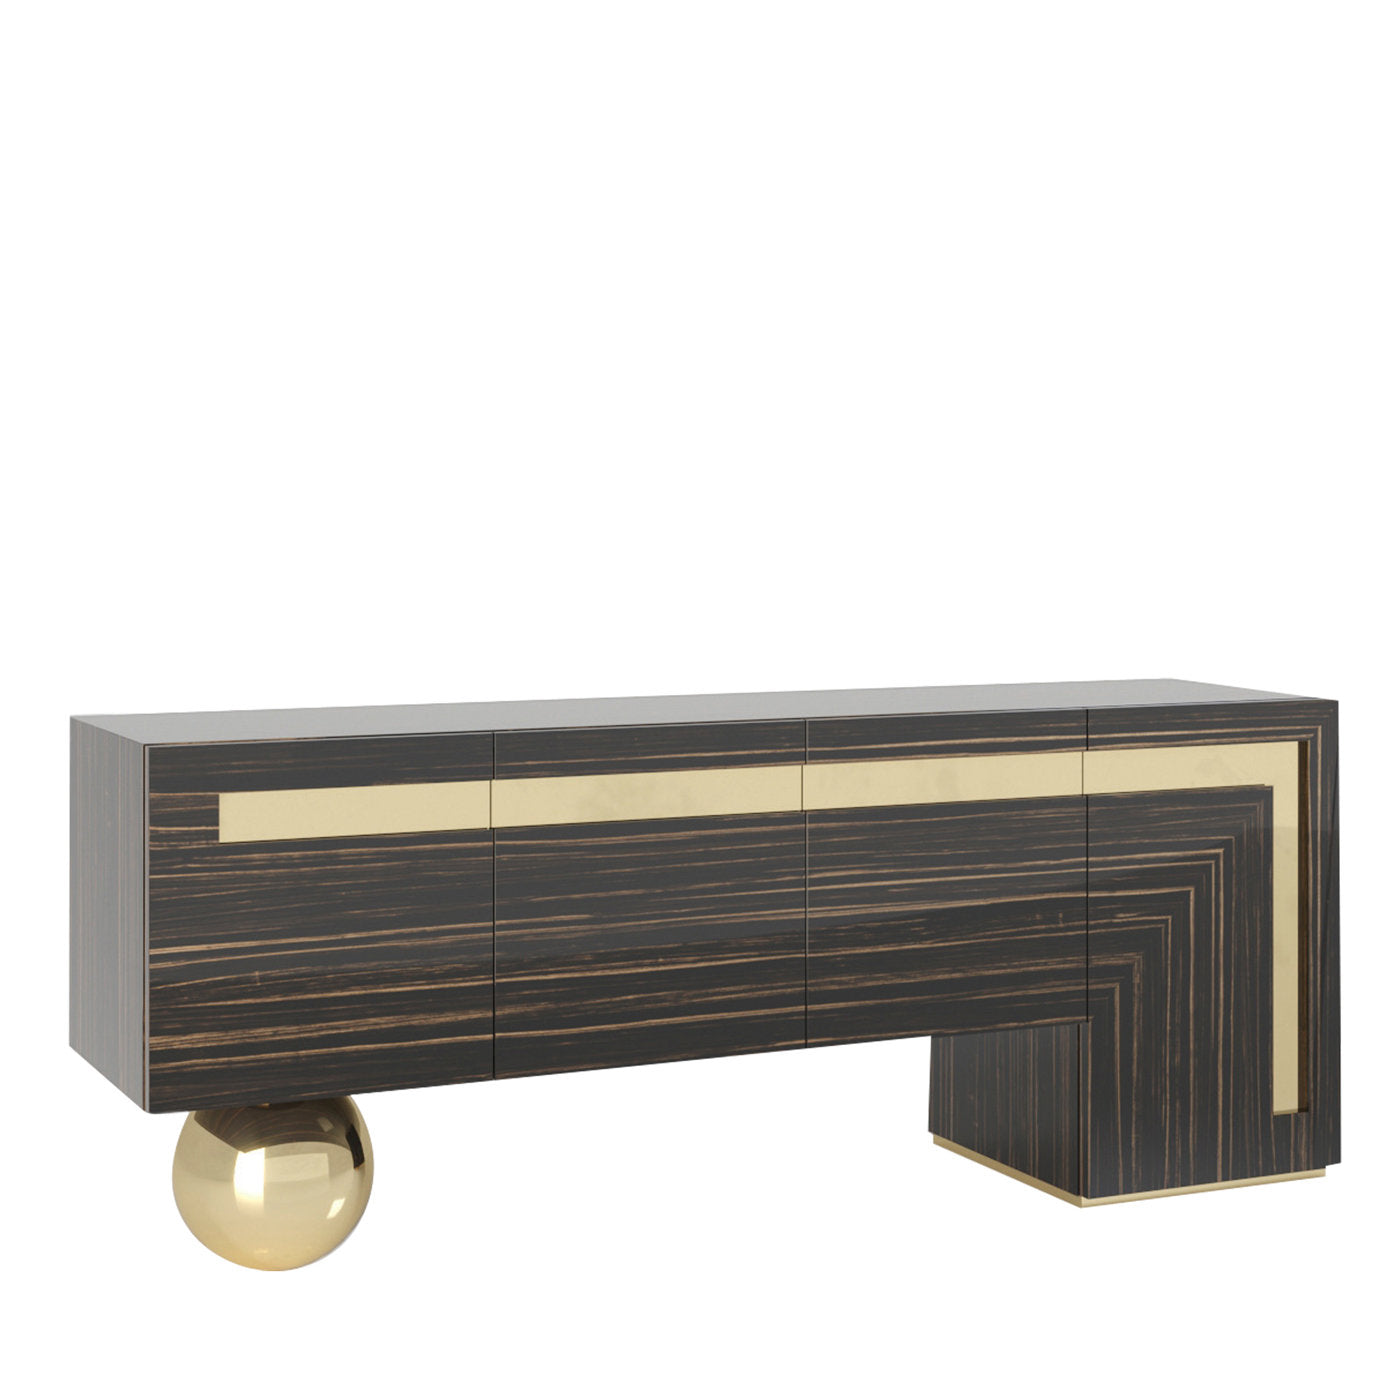 Boyle Sideboard by Giannella Ventura - Main view